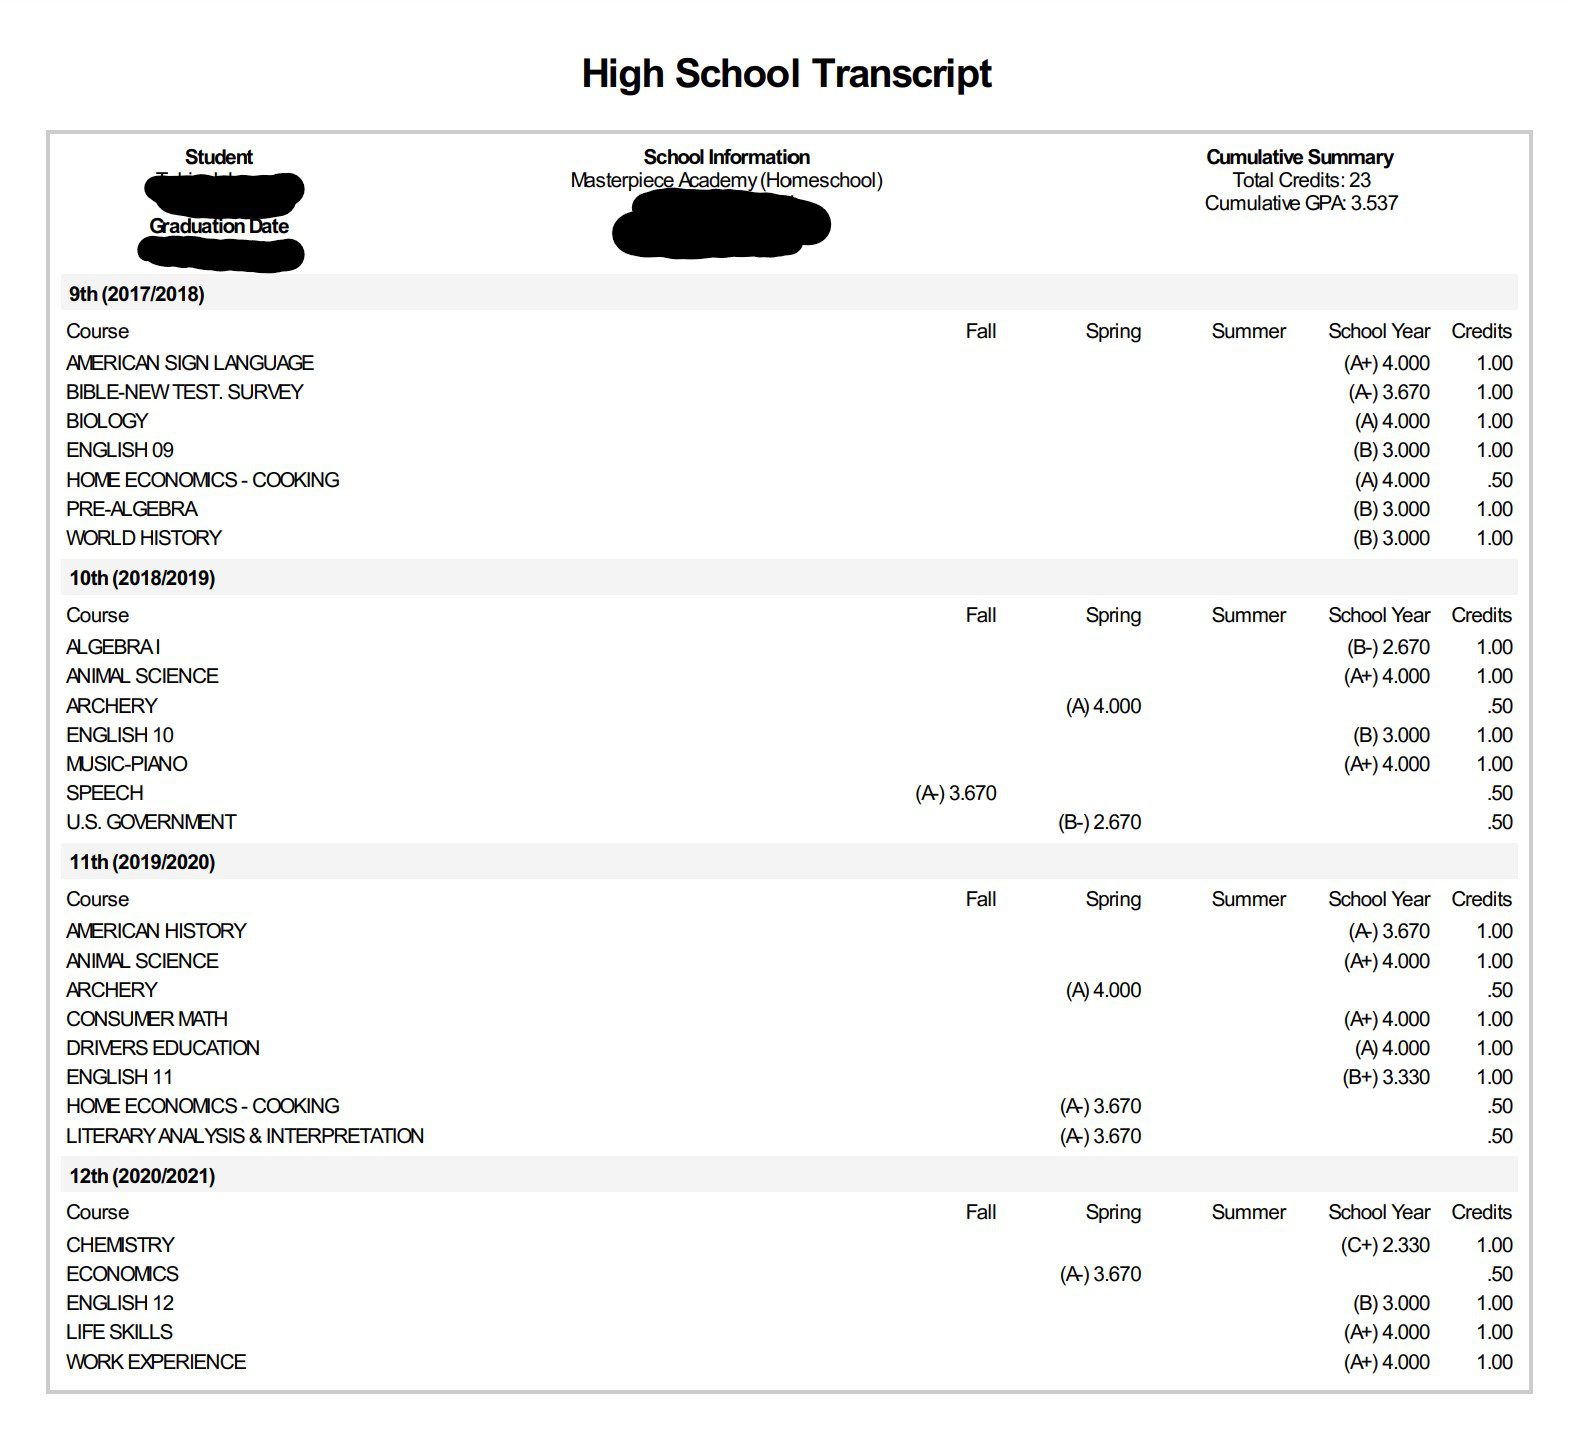 An example of a homeschool high school transcript, including student and school info, graduation date, cumulative summary, and individual course grades and credits. 